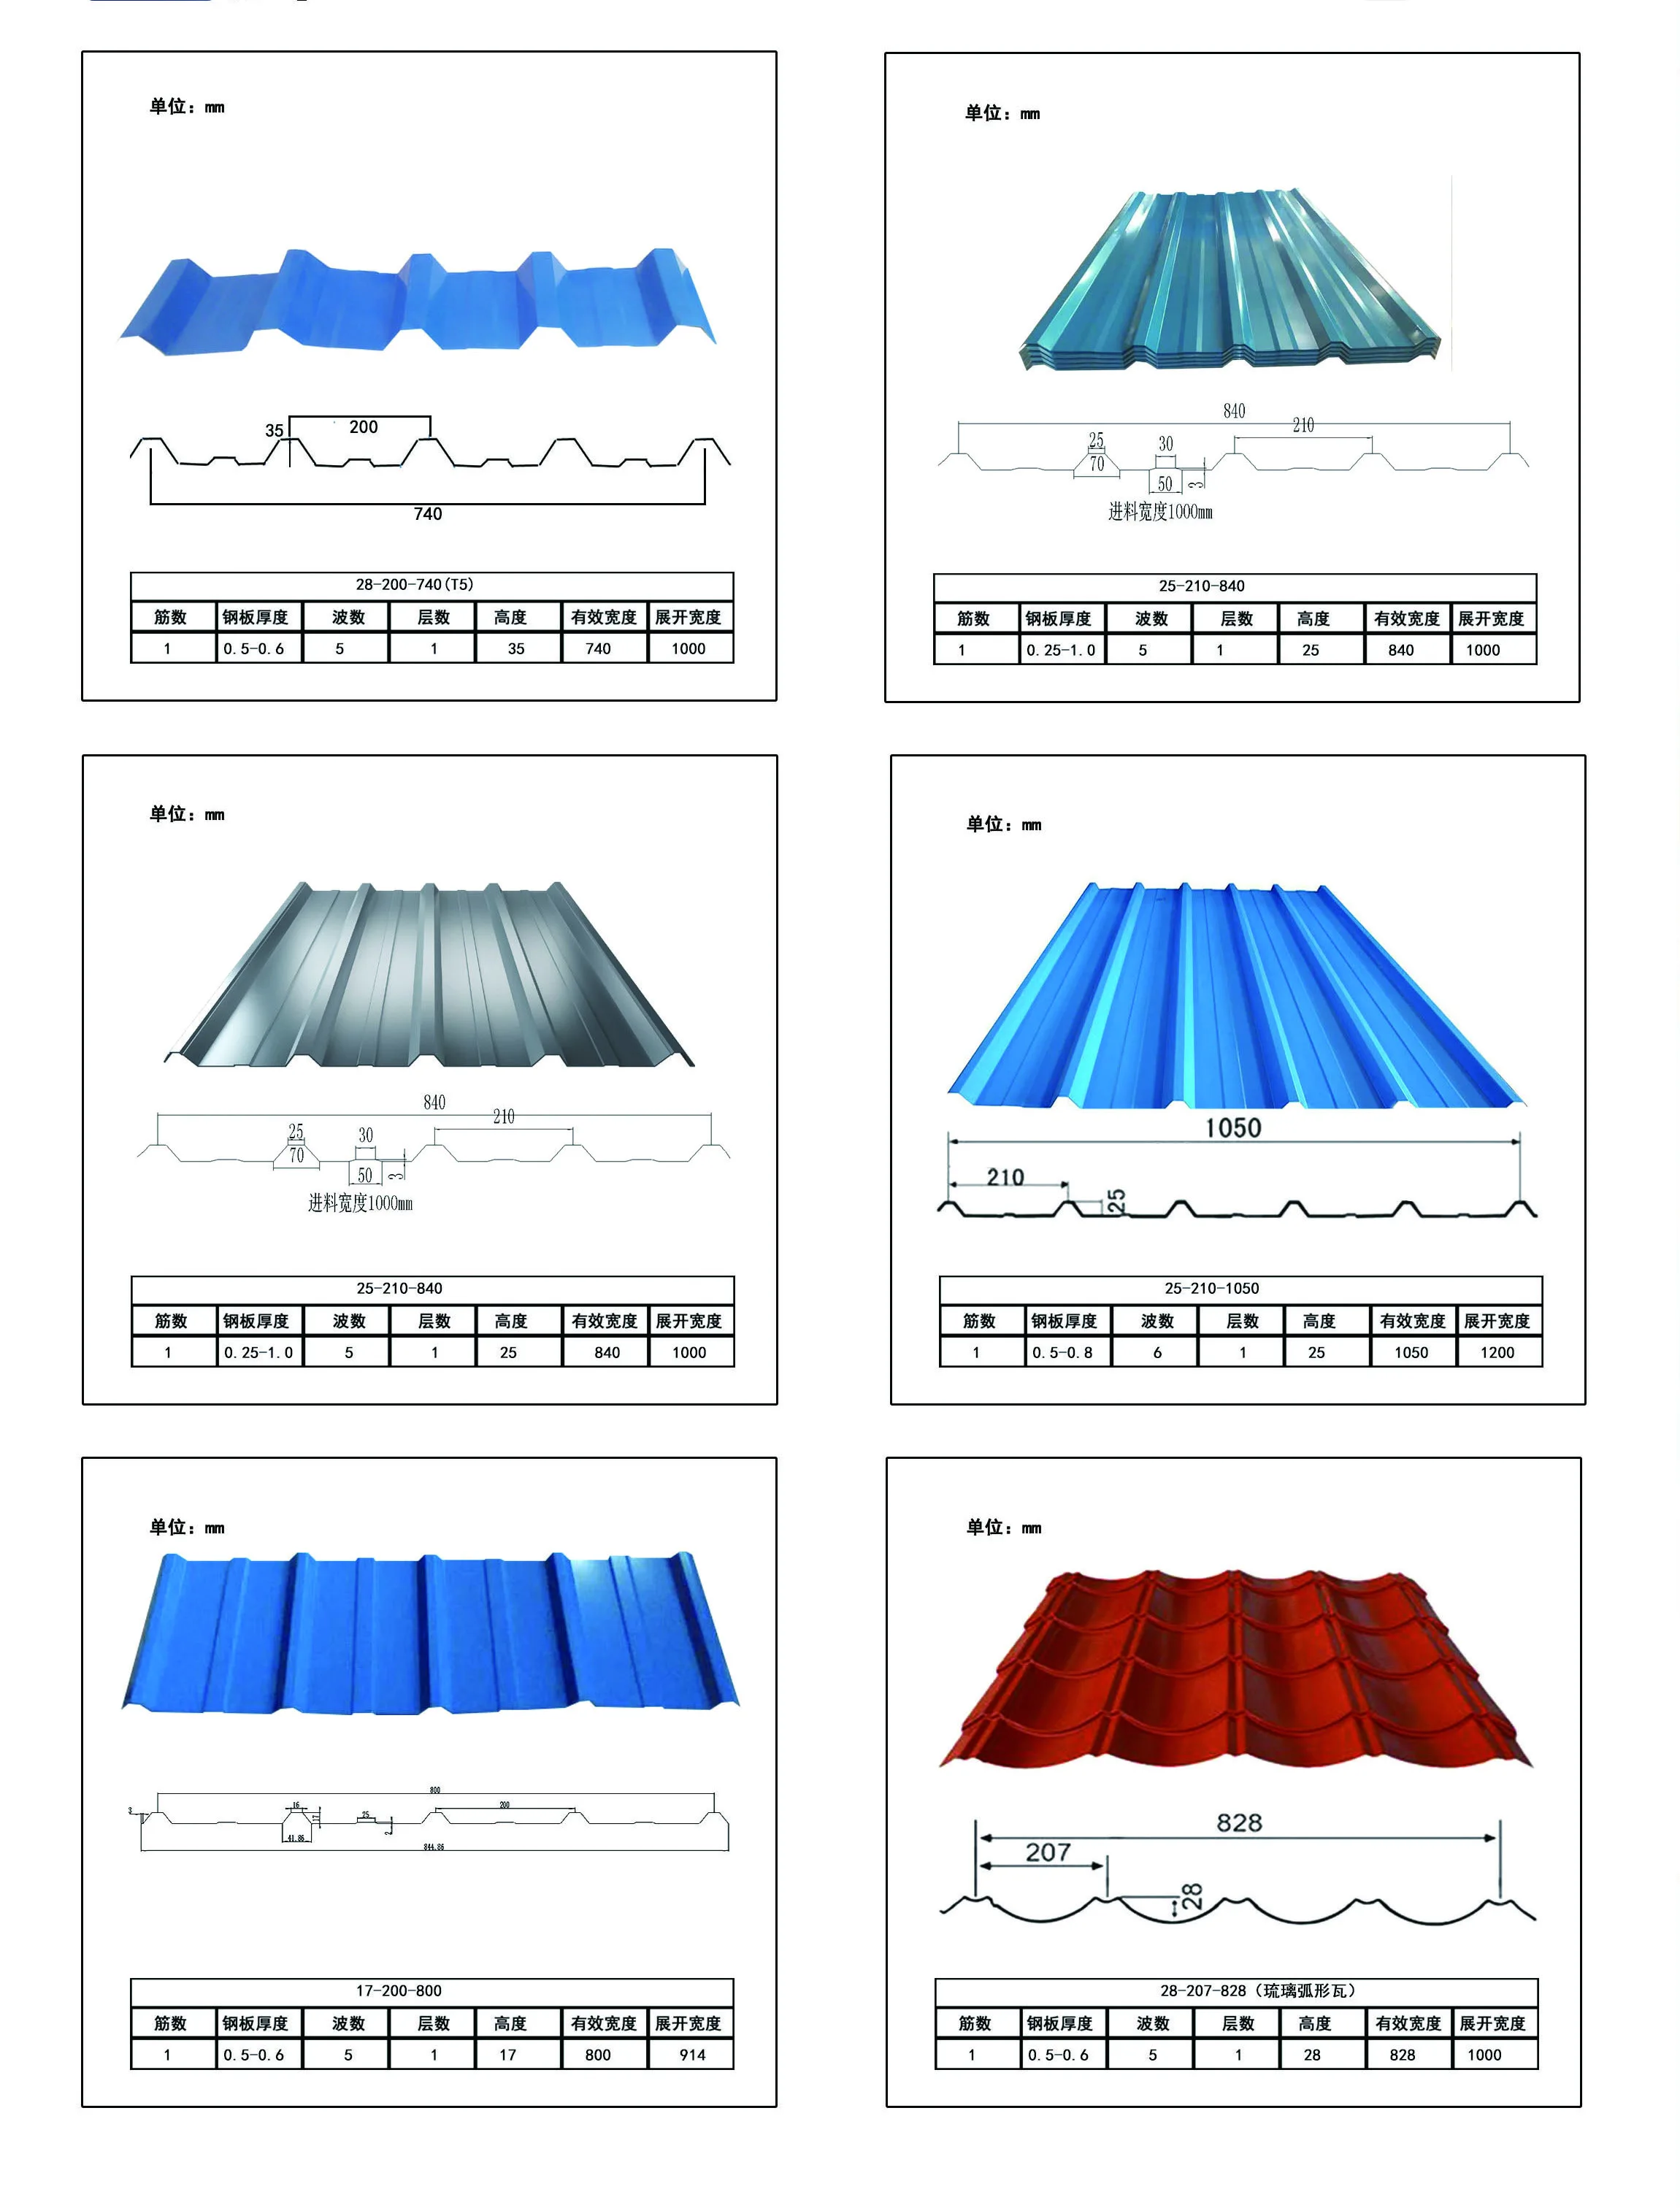 South Africa Colorful Luxury Roof sheet PPGI roofing sheet color Coated Corrugated Resin Roof Tiles Prices